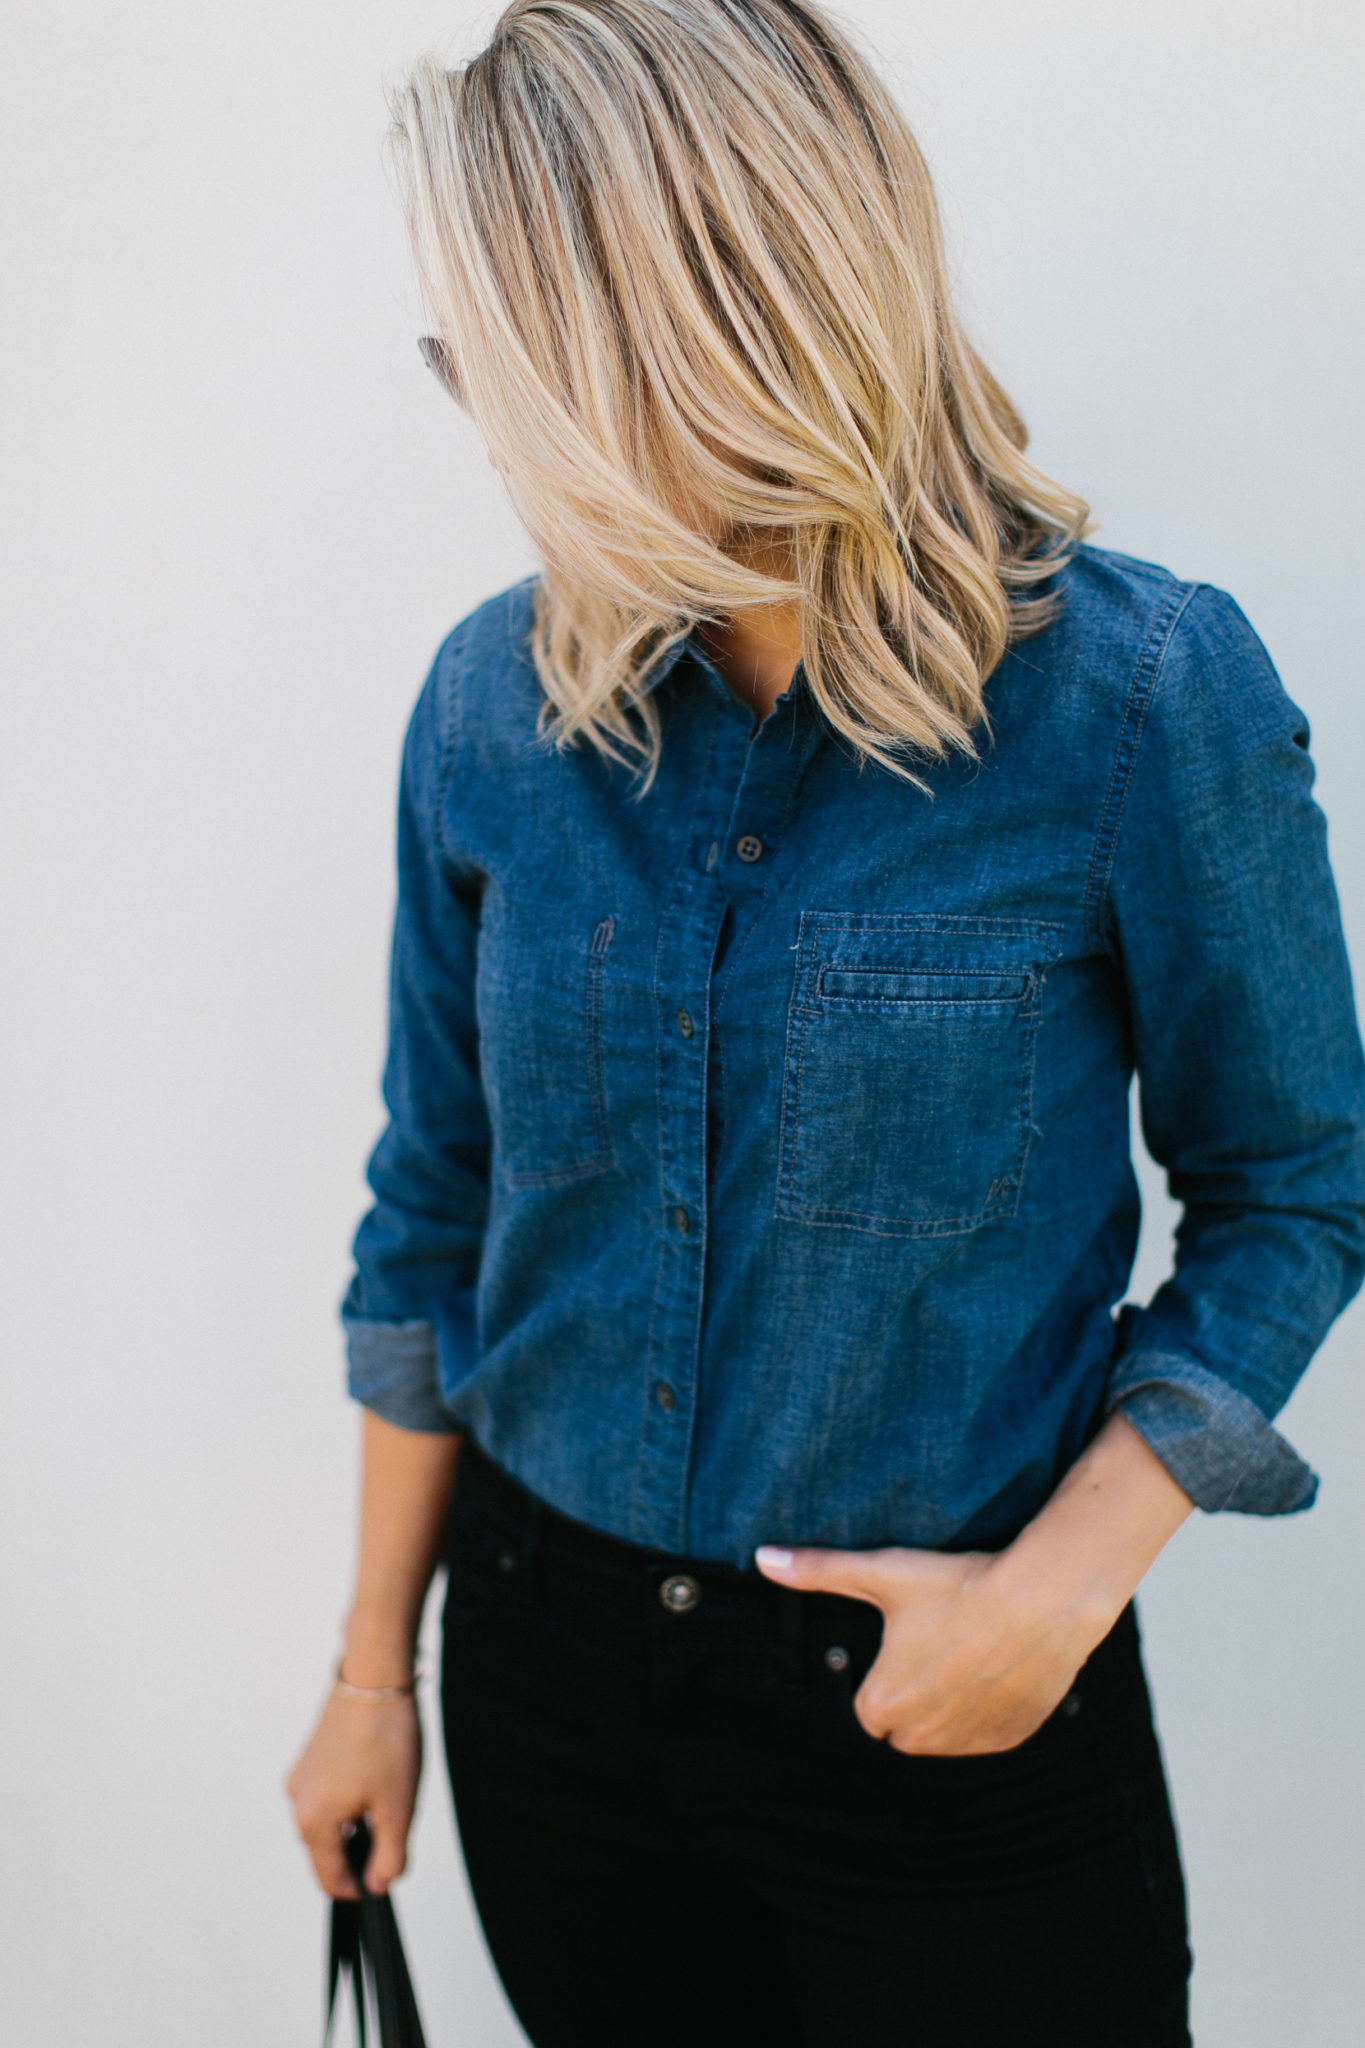 Madewell Denim and Grand Opening Party in Ann Arbor